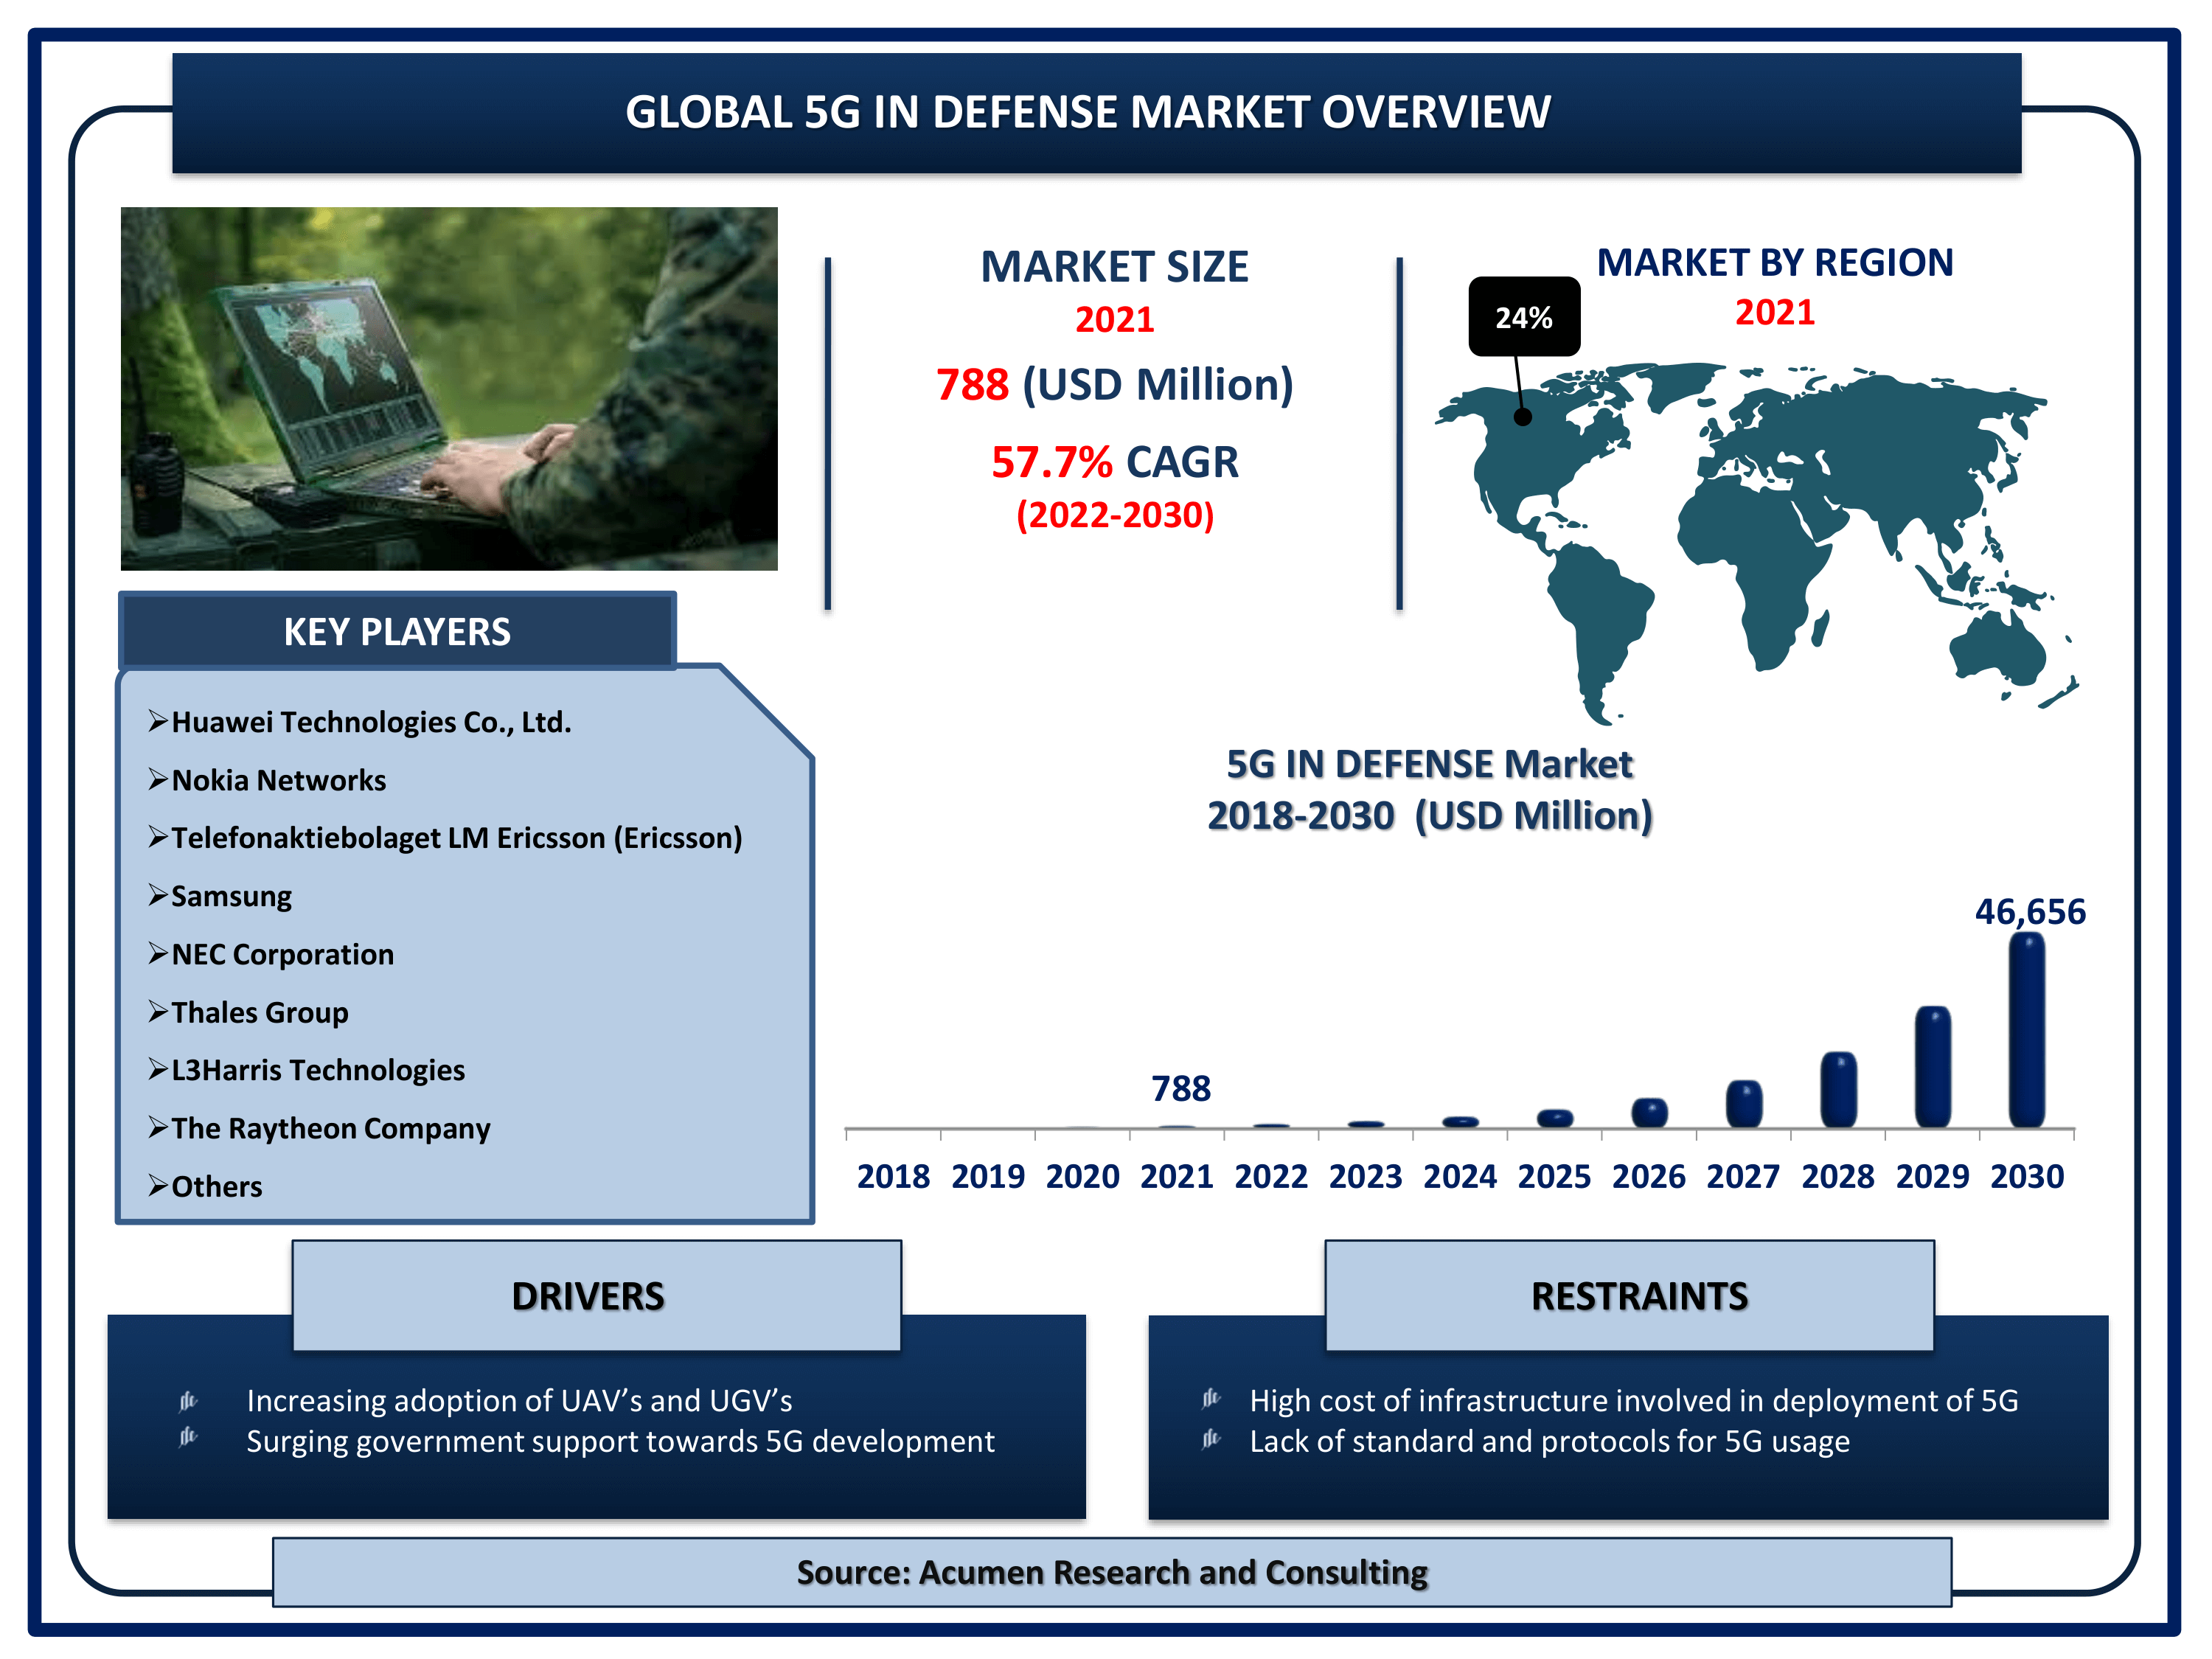 Global 5G in defense market revenue is estimated to reach USD 46,656 Million by 2030 with a CAGR of 57.7% from 2022 to 2030